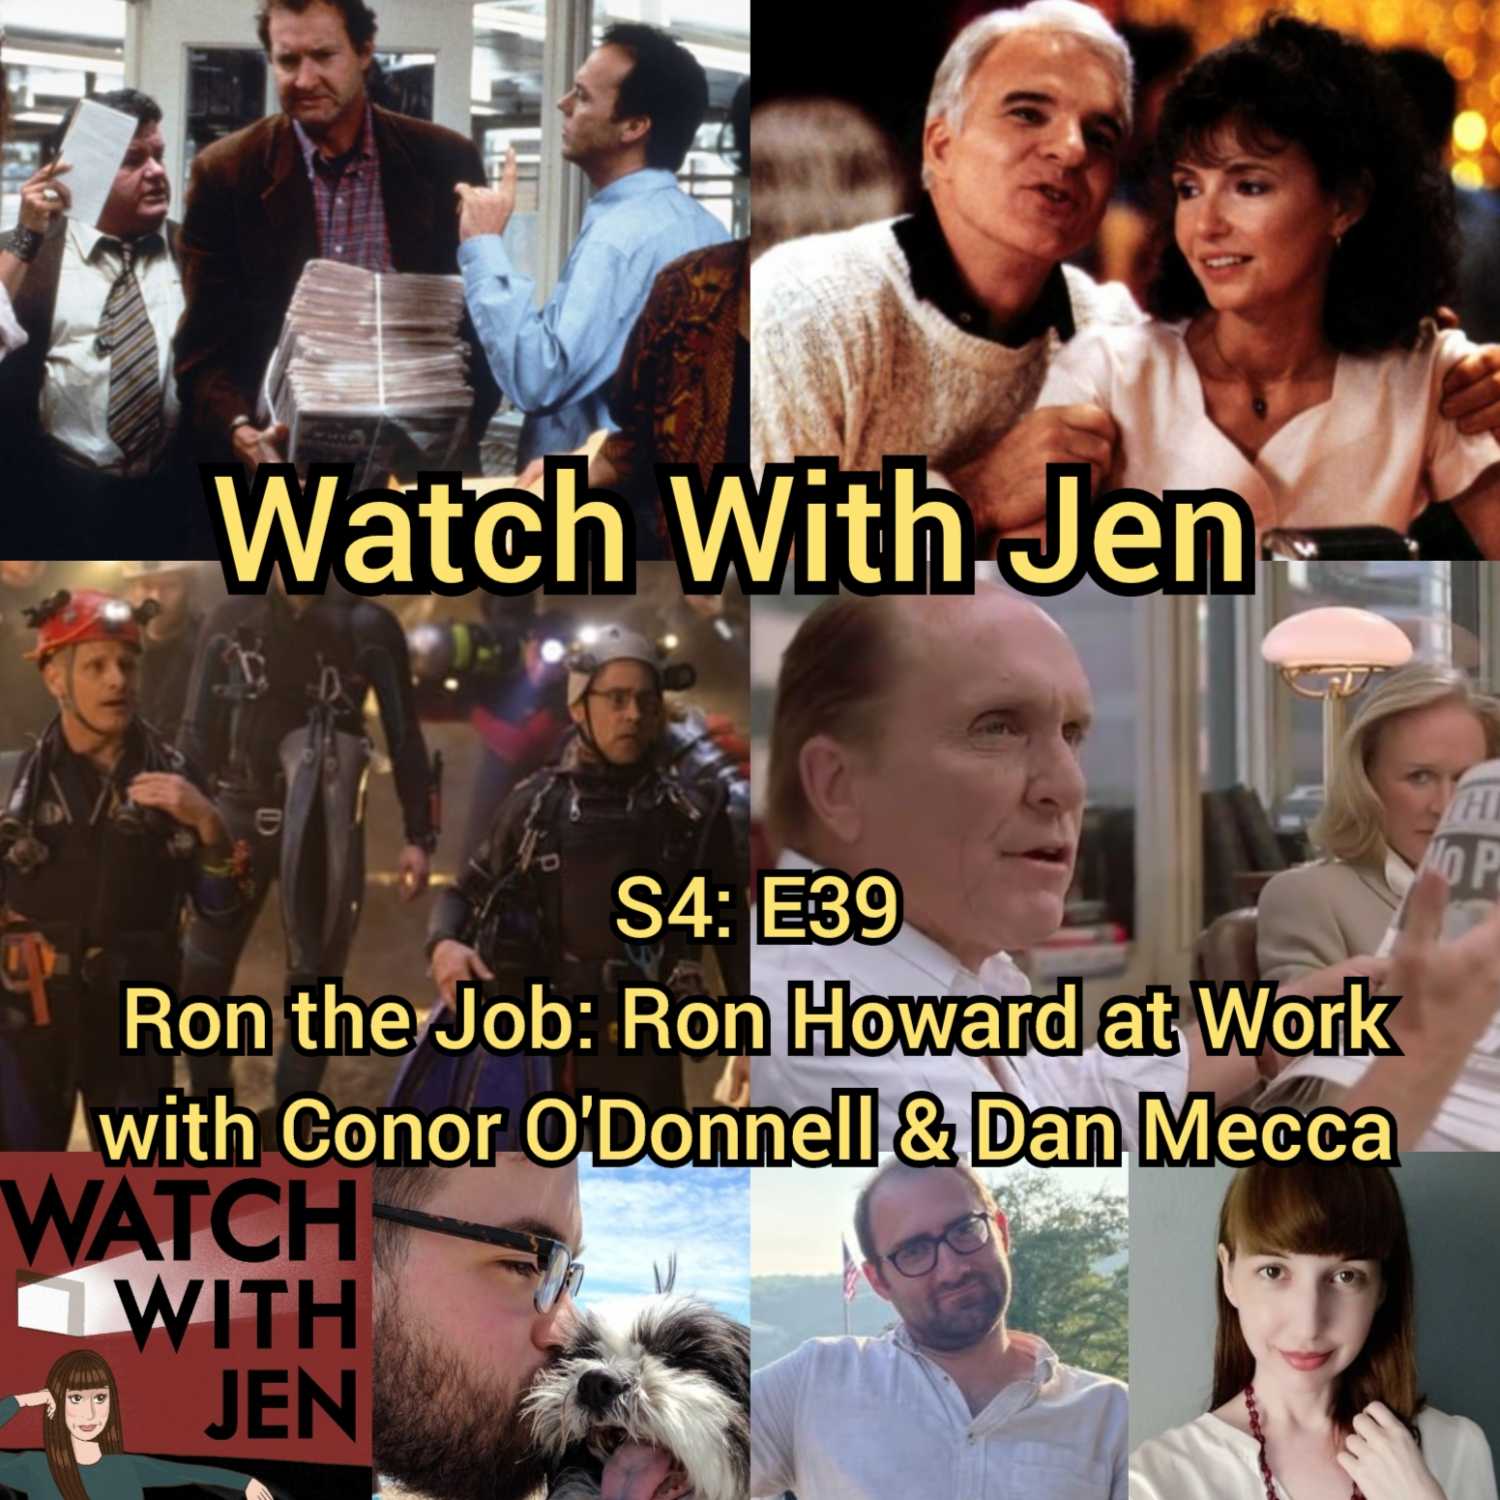 Watch With Jen - S4: E39 - Ron the Job: Ron Howard at Work with Conor O’Donnell & Dan Mecca